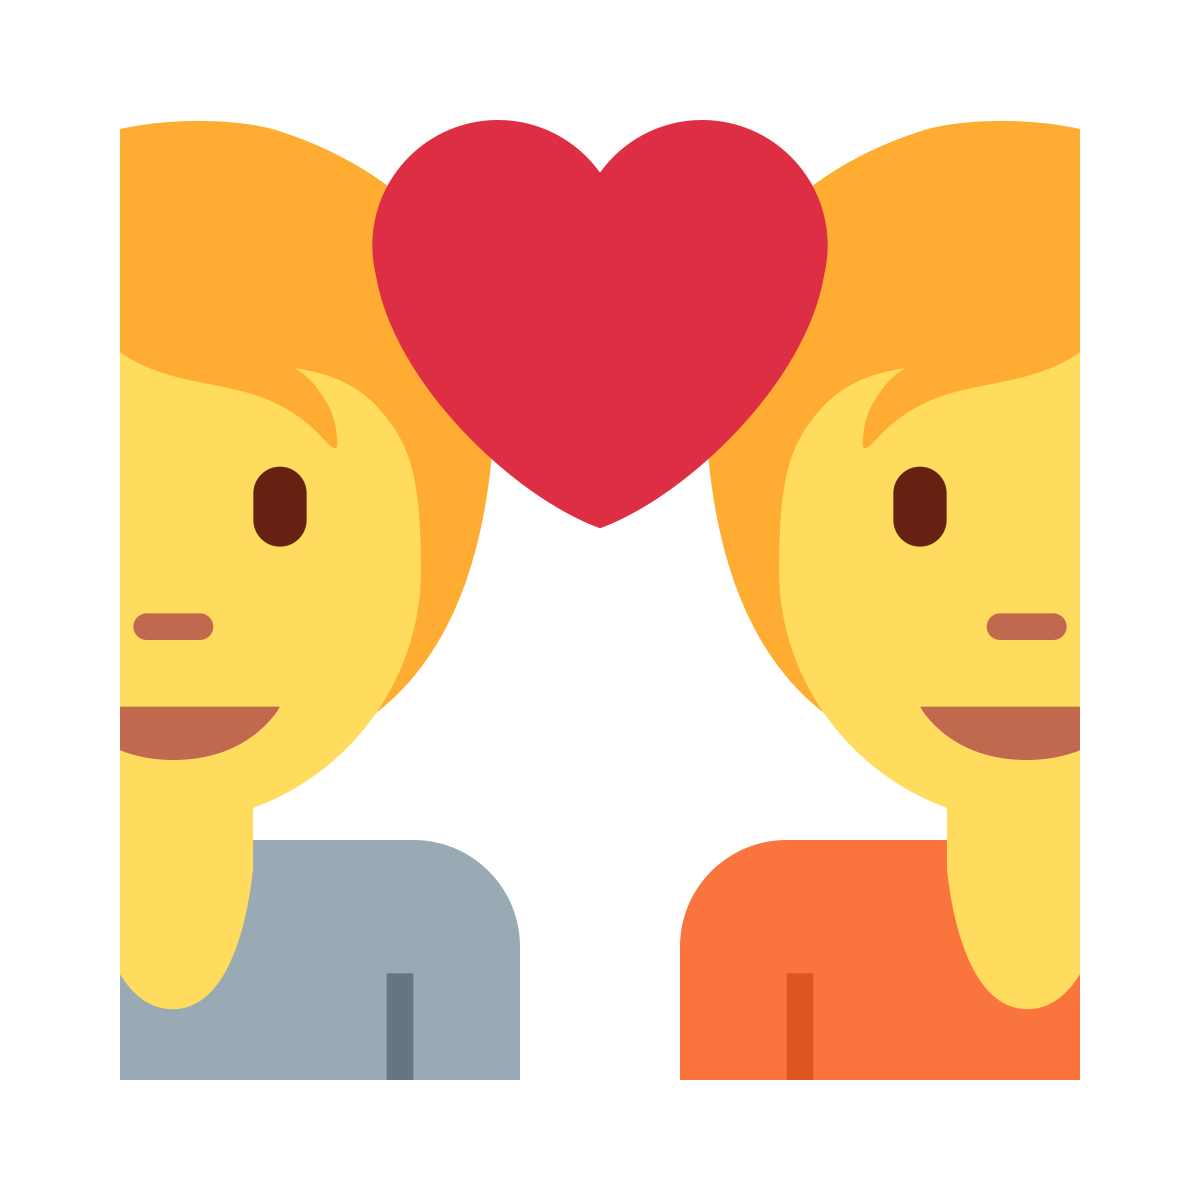 Couple With Heart Emoji Used For